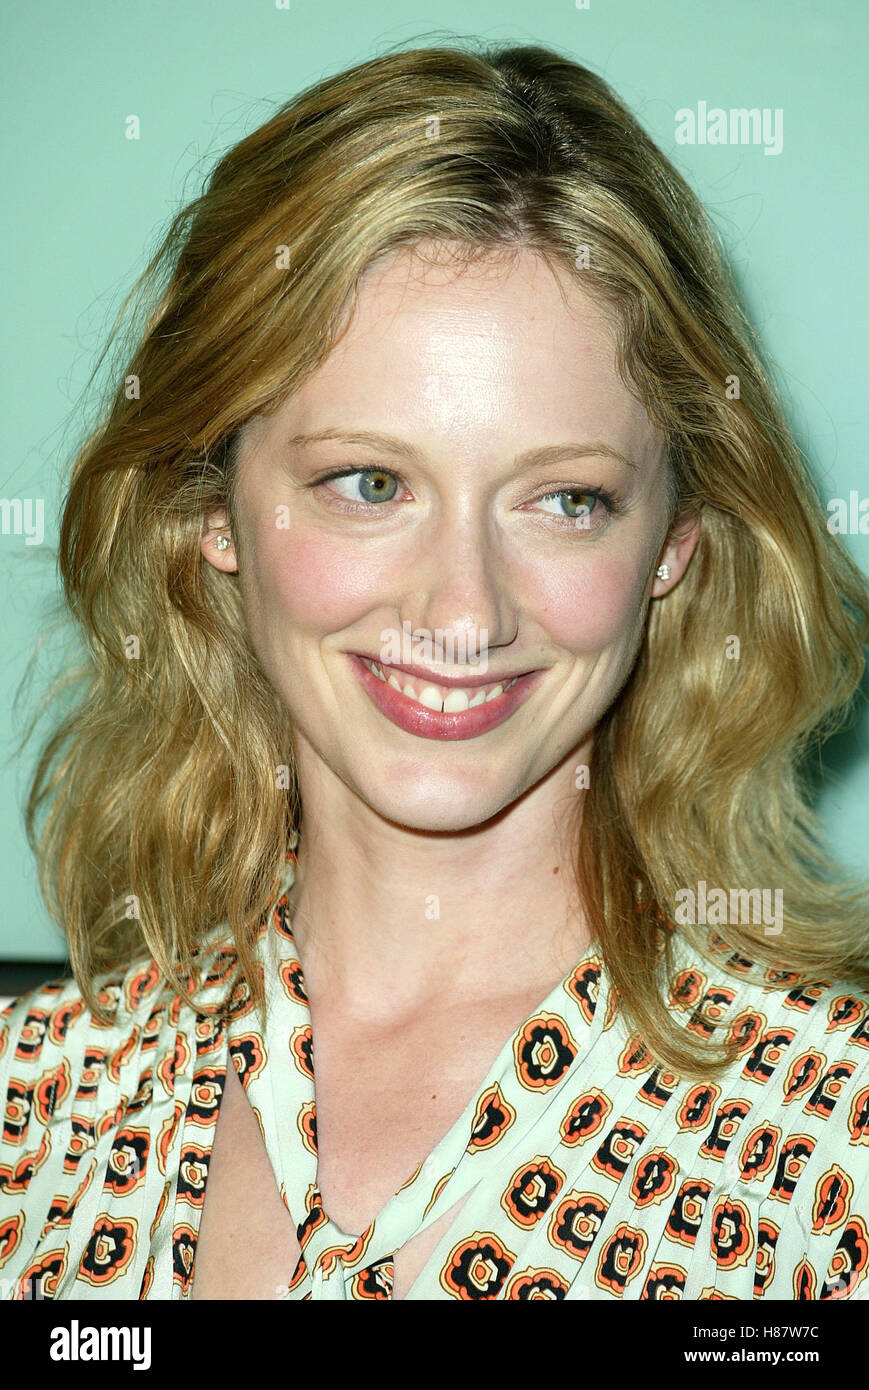 JUDY GREER HOW TO LOSE A GUY IN 10 DAYS CINERAMA DOME HOLLYWOOD LOS ANGELES USA 27 January 2003 Stock Photo